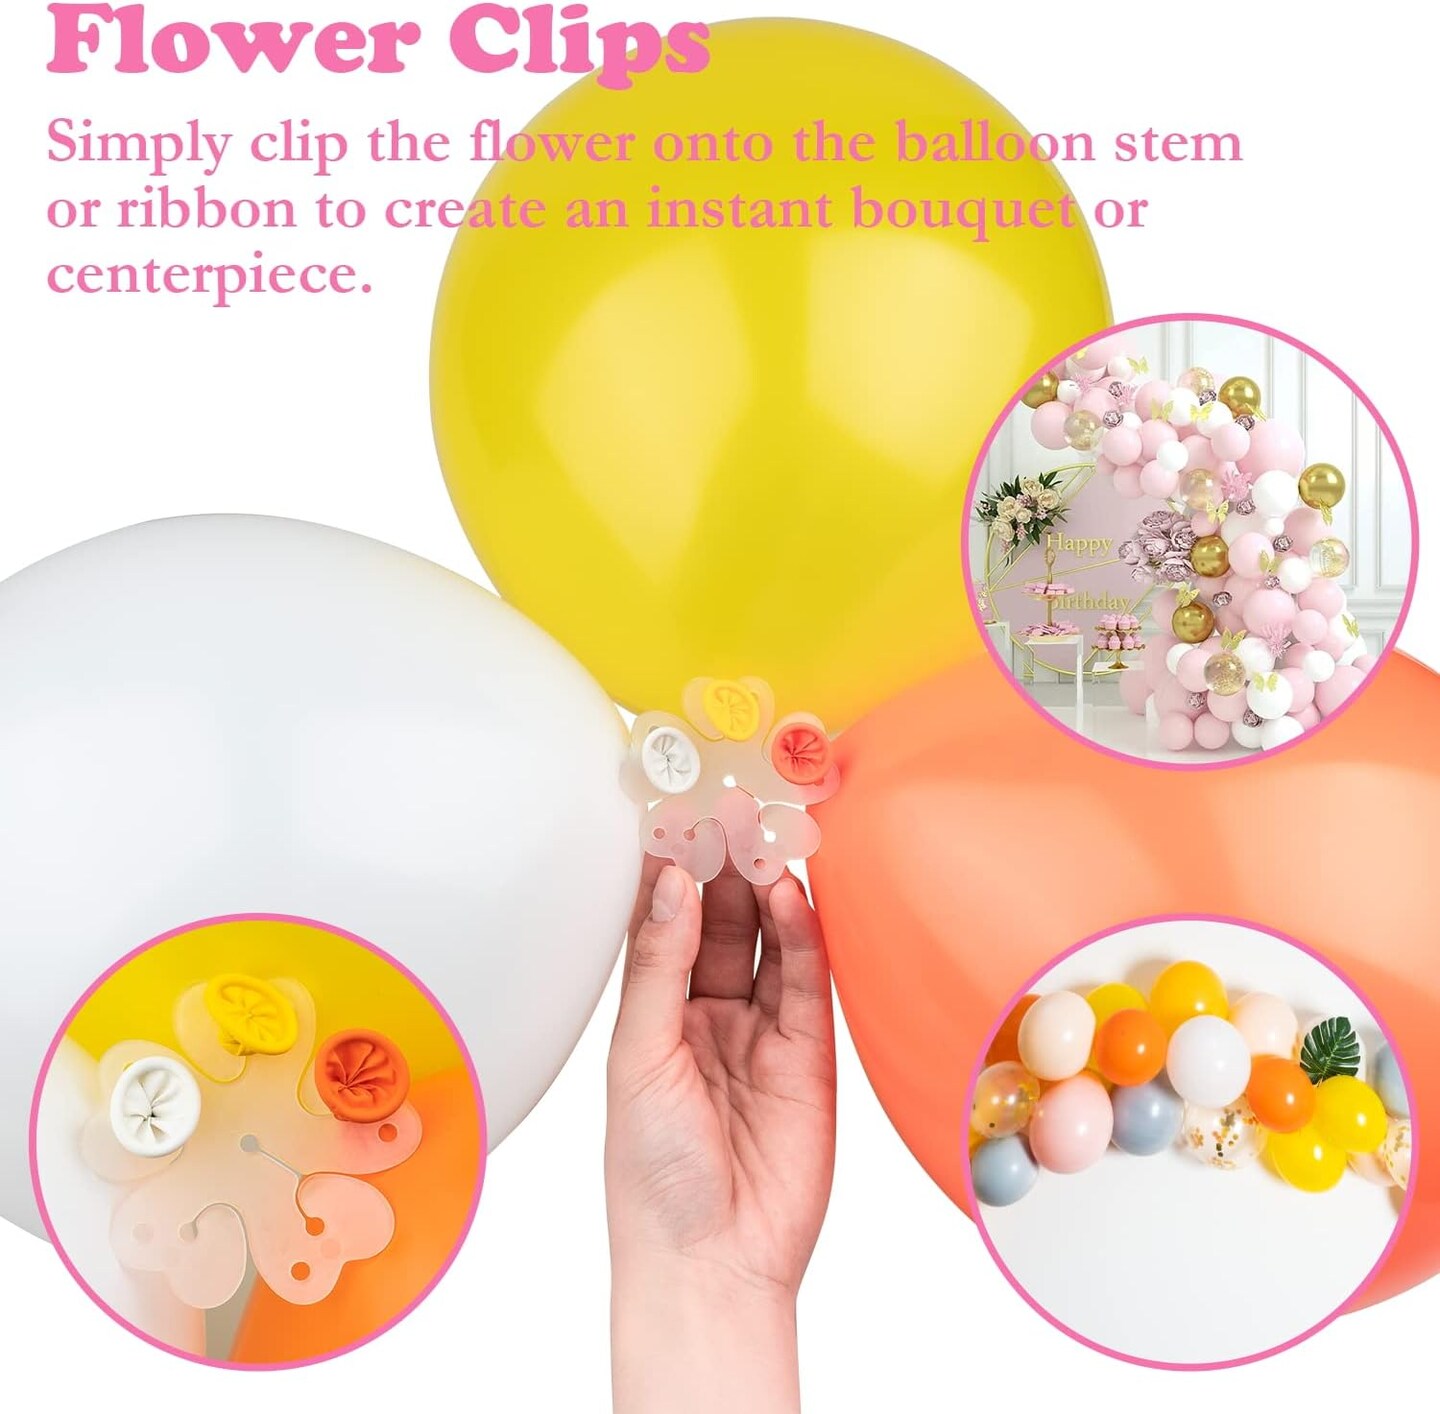 Balloon Arch Kit Balloon Garland Decorating Strip Kit, Balloon Tape Strips Double Hole with Dot Glue Point Stickers, Balloon Flower Clip, Balloon Tying Tool, Suitable for Party Birthday Wedding